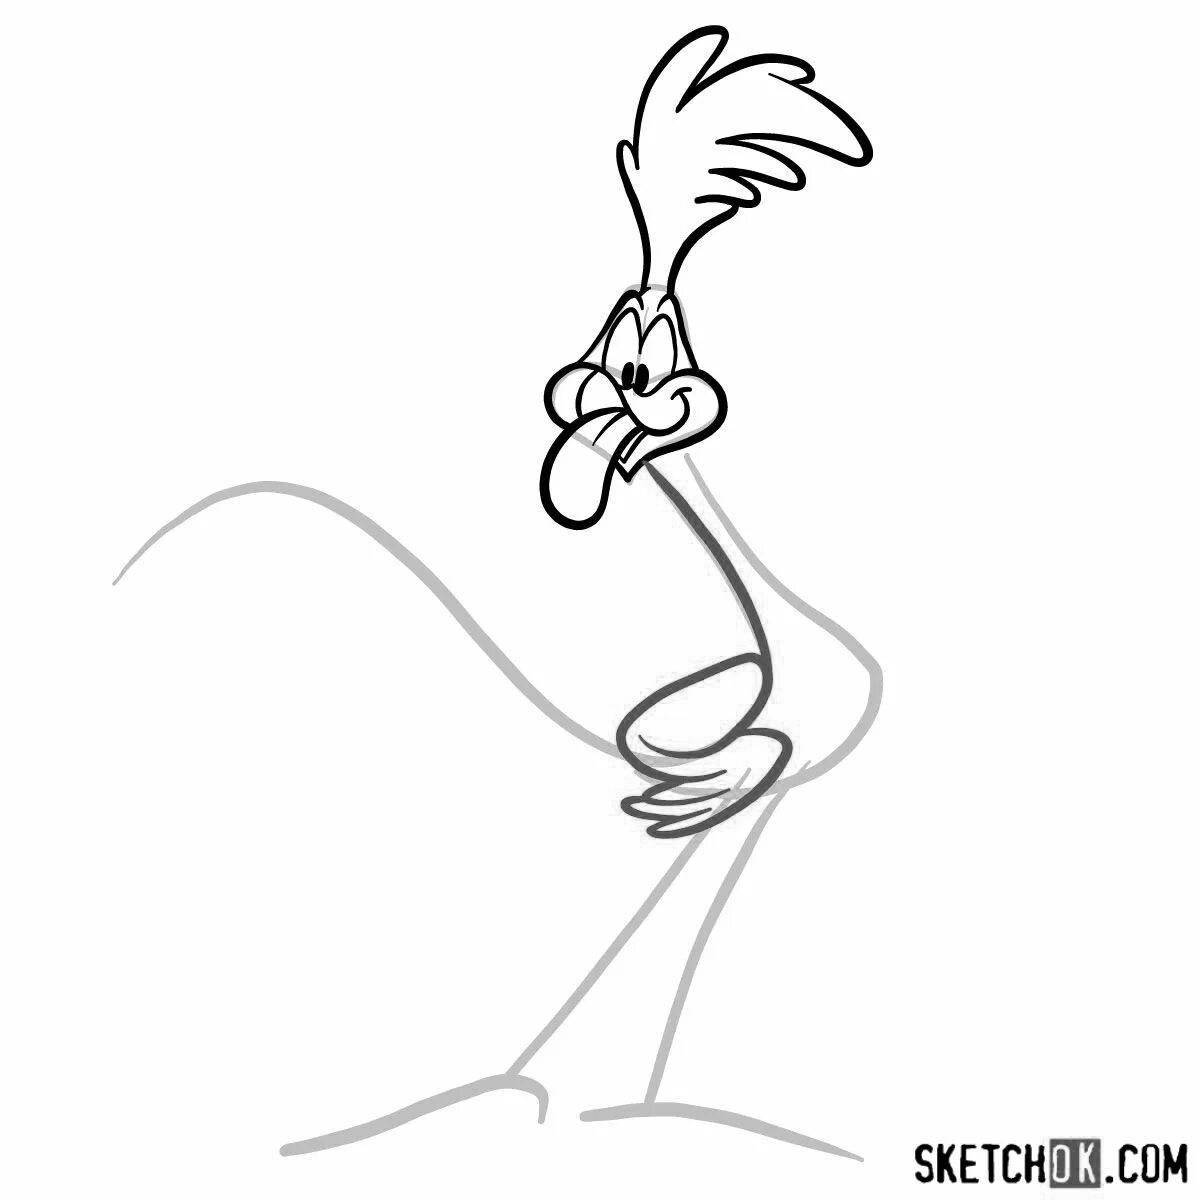 Road runner coloring page